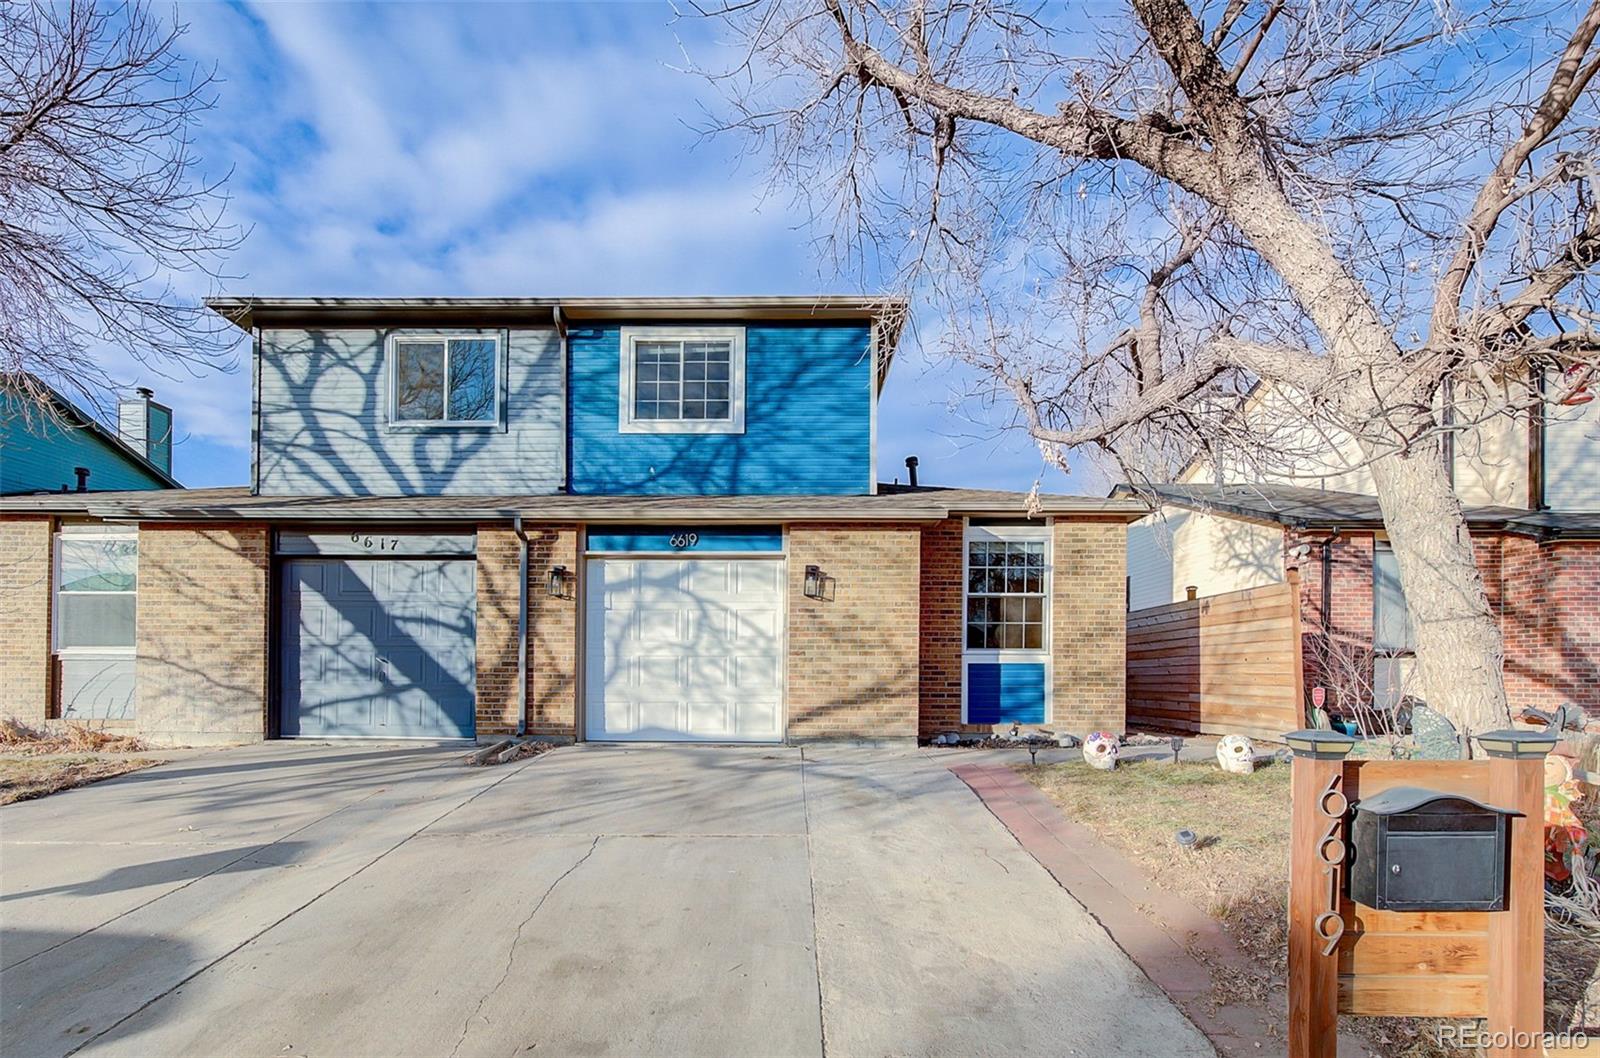 6619 e 62nd place, commerce city sold home. Closed on 2024-03-14 for $394,000.